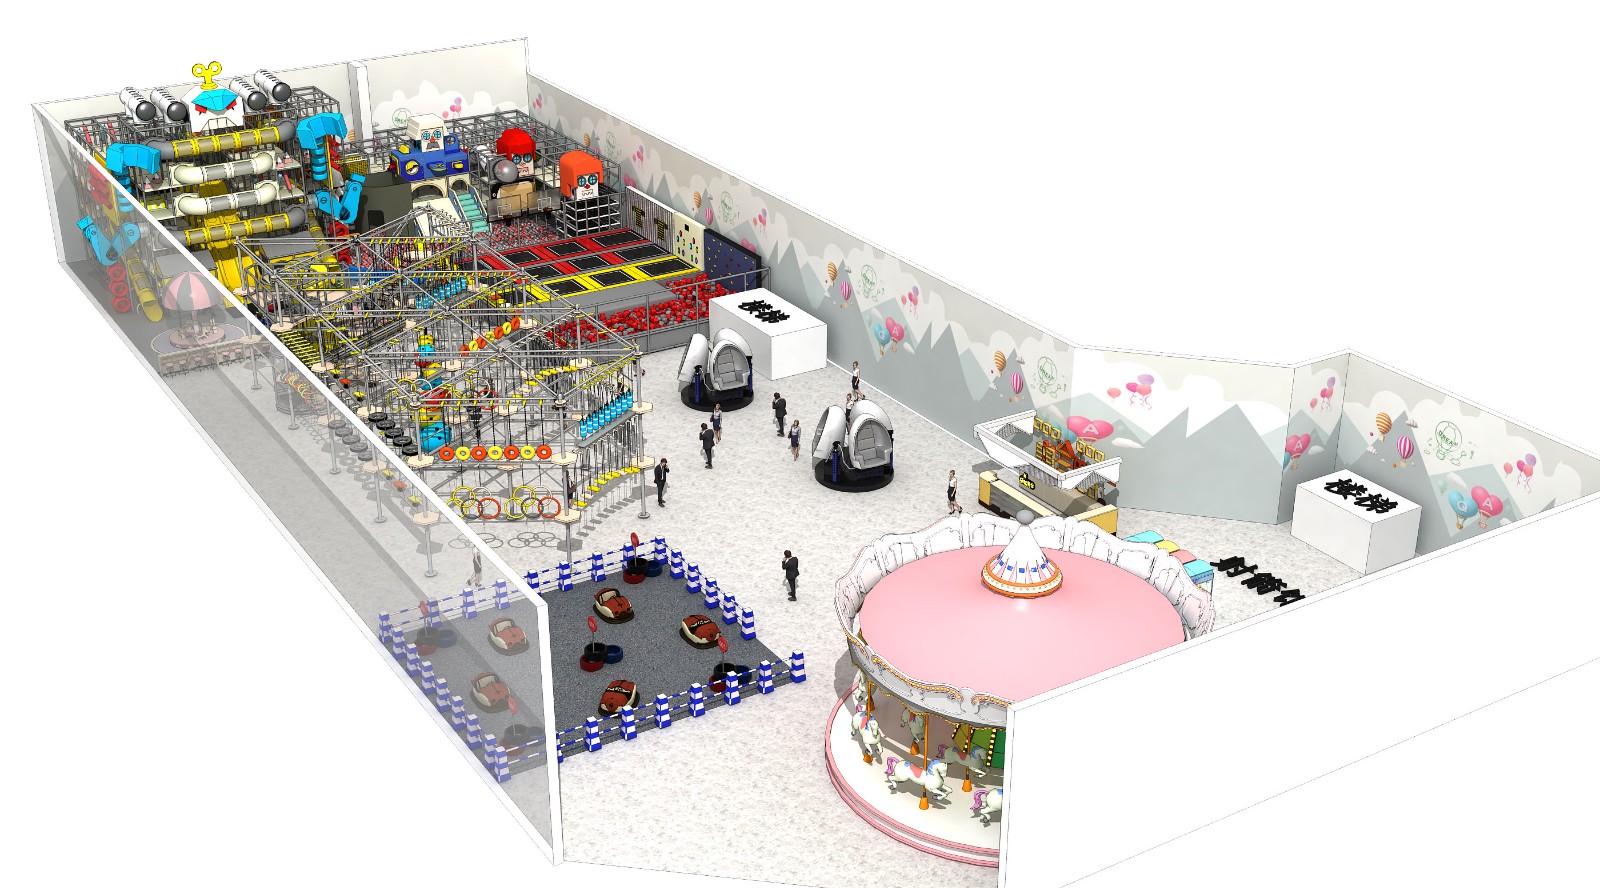 Can You Find the Perfect Indoor Playground Supplier?